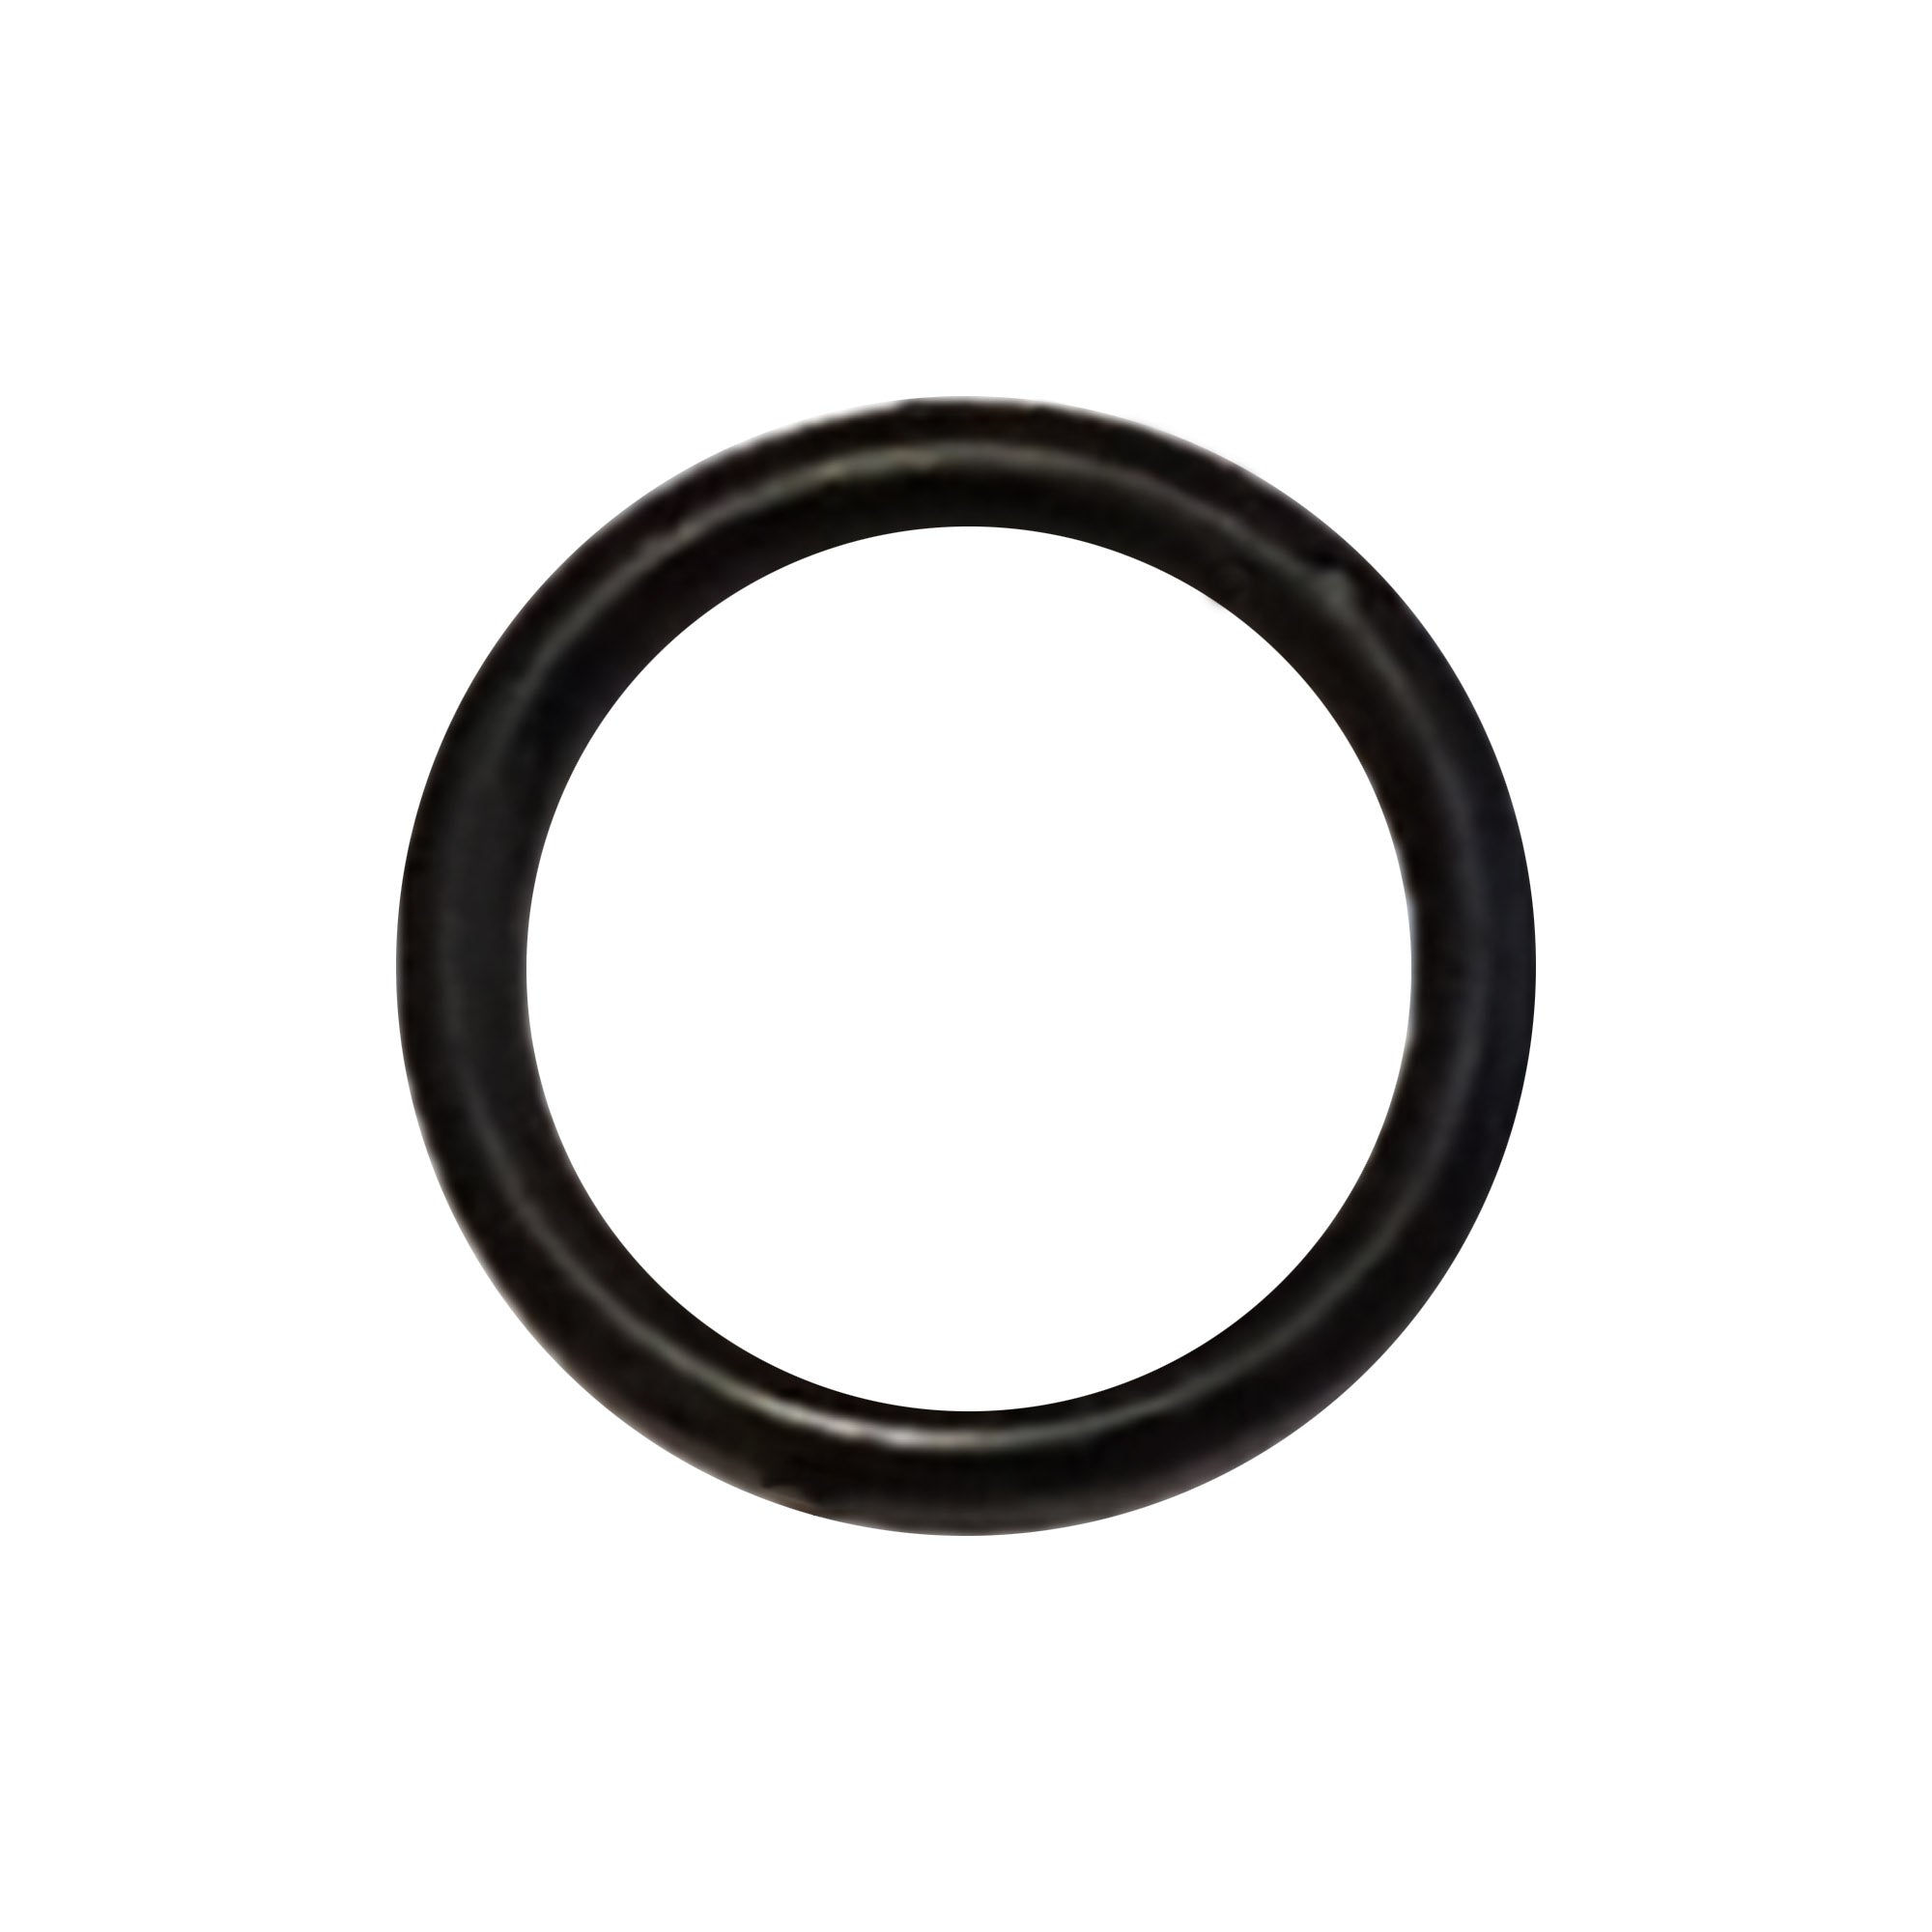 256468 - O-Ring, Pack of 6 - PURspray